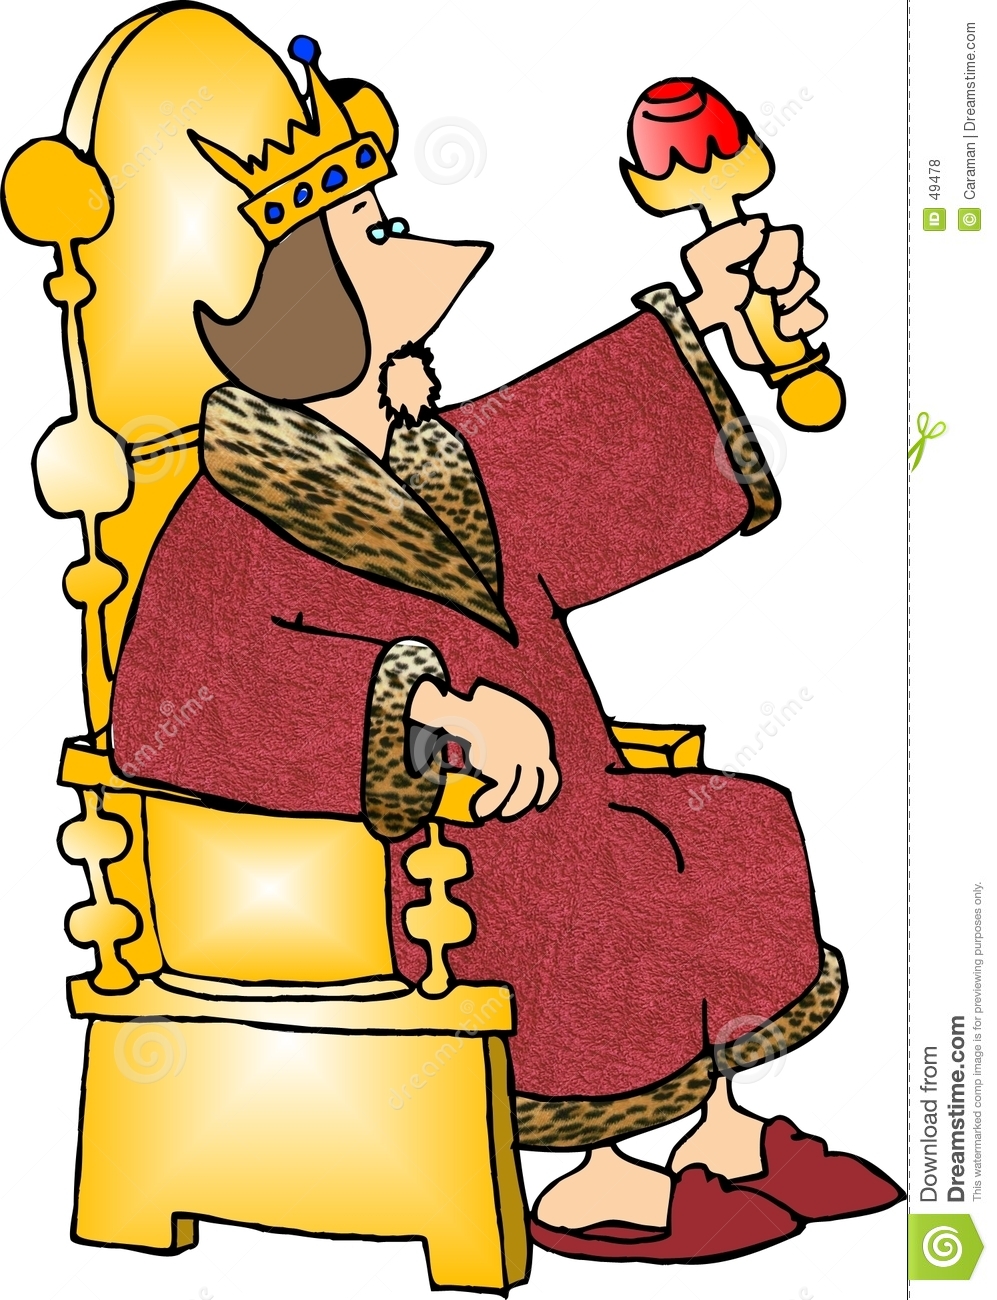 Throne clipart #18, Download drawings